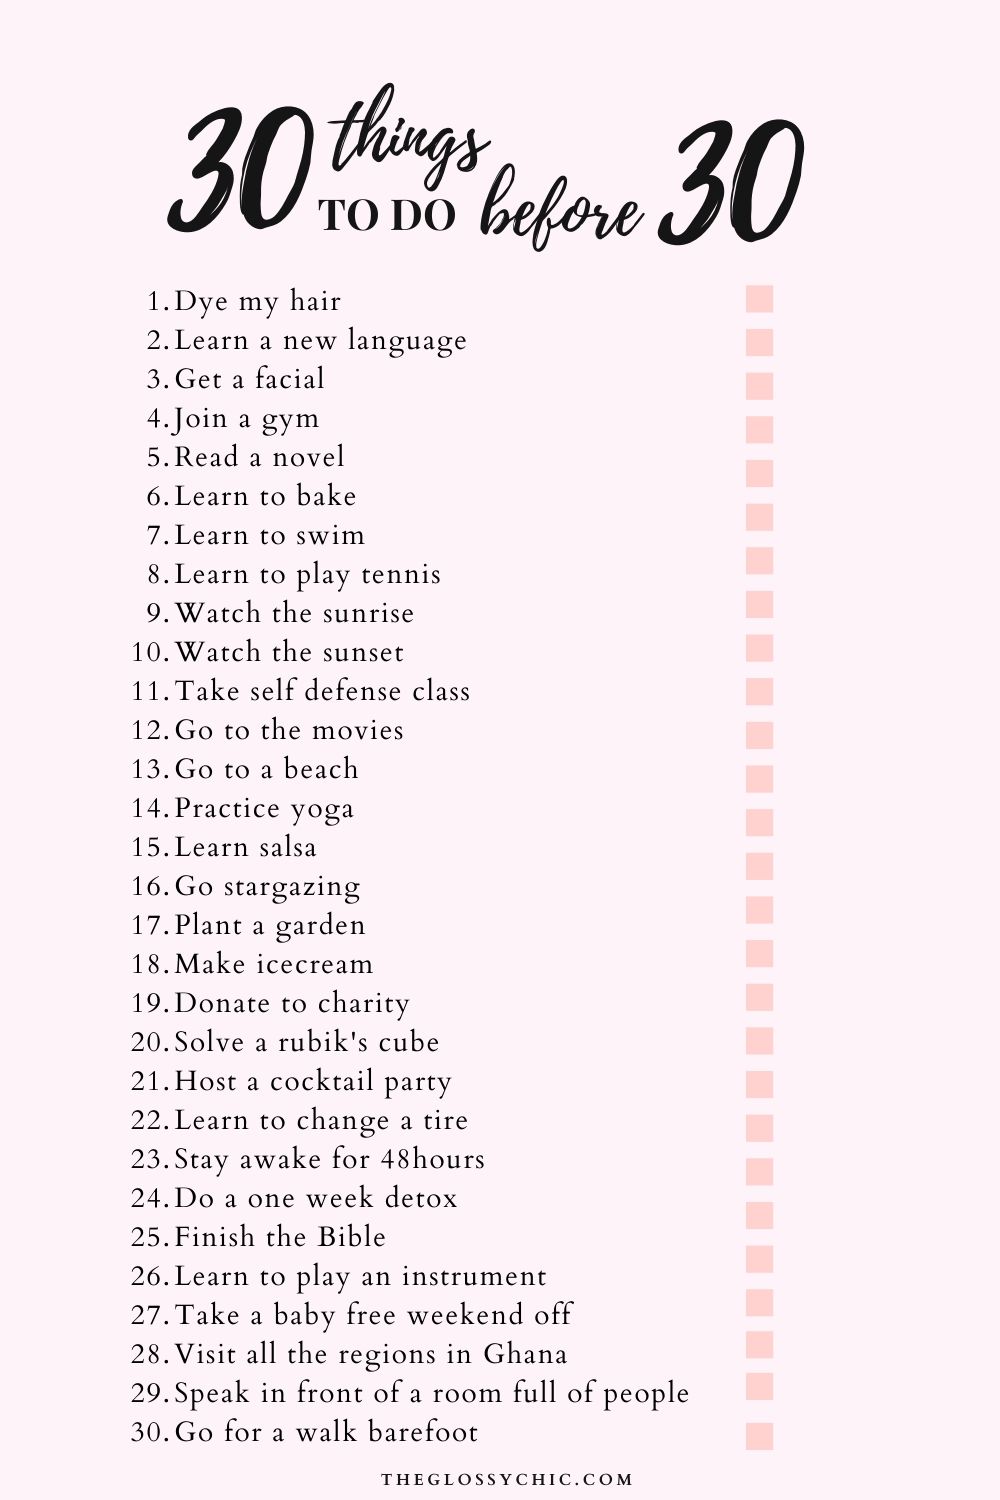 30 things to do before 30